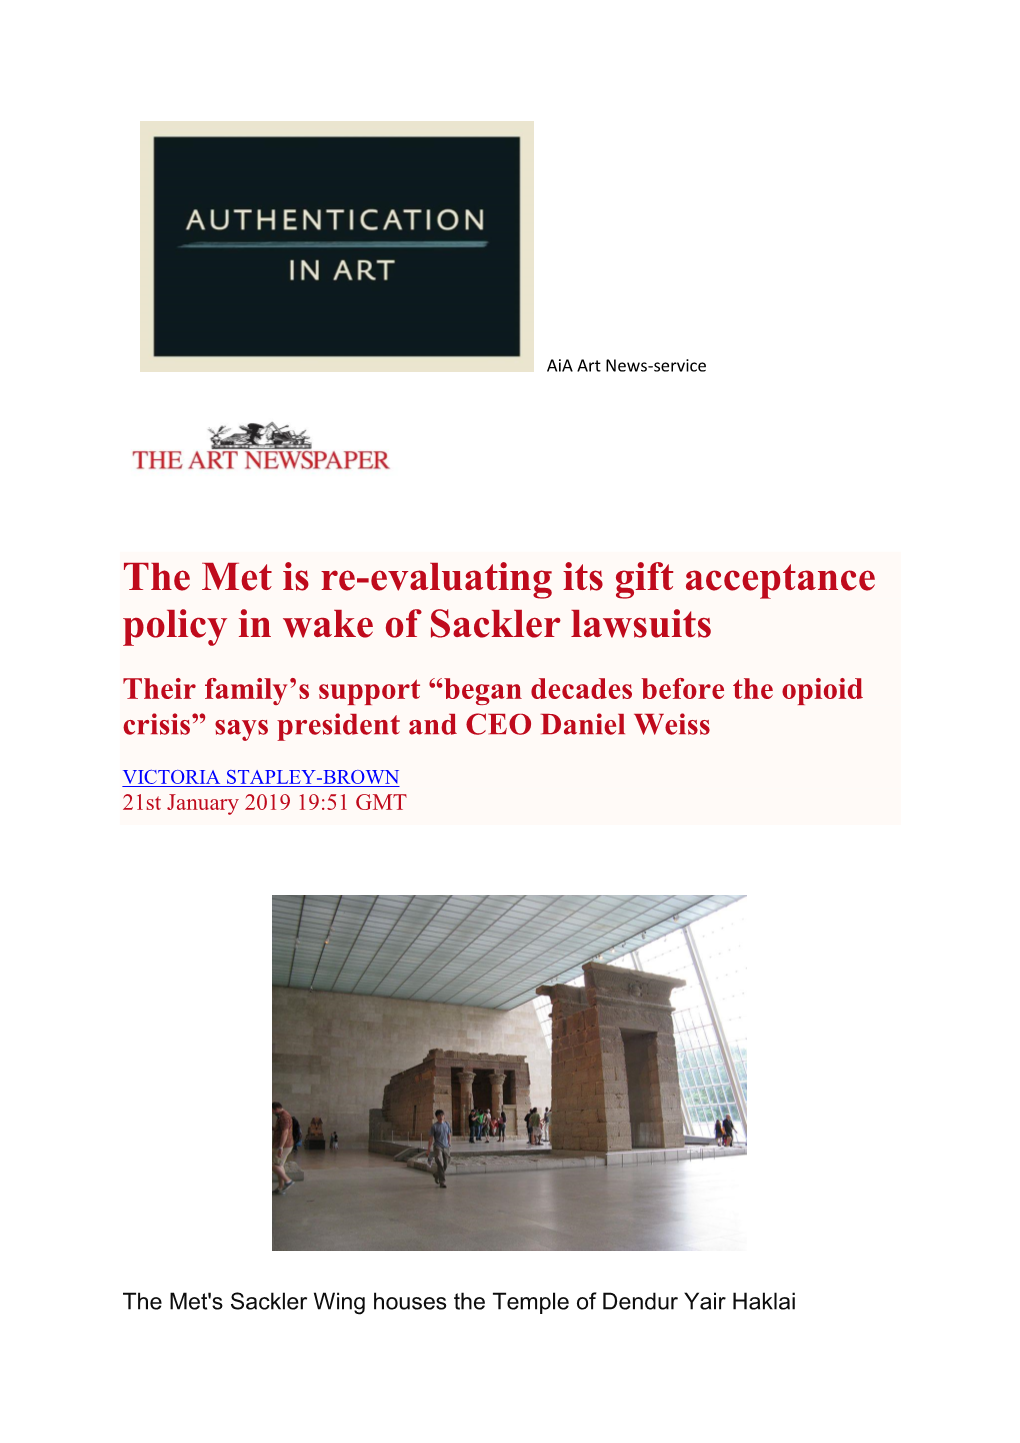 The Met Is Re-Evaluating Its Gift Acceptance Policy in Wake Of